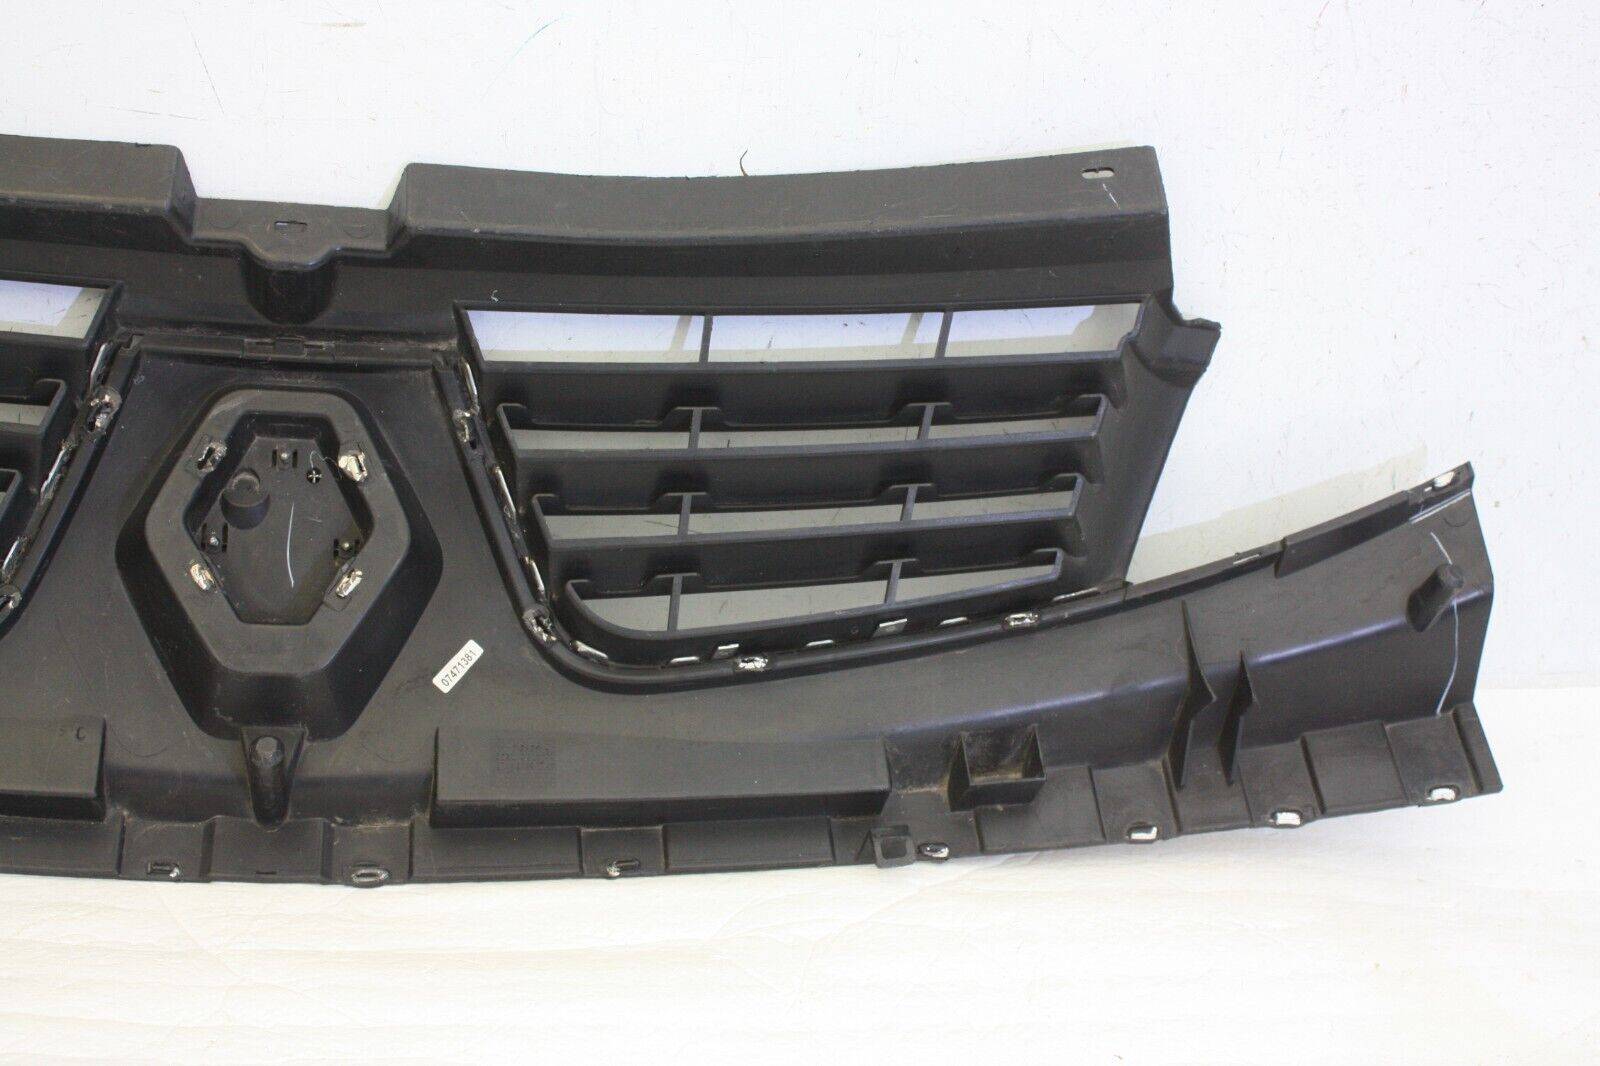 Renault-Trafic-Front-Bumper-Upper-Section-Grill-2007-TO-2014-623100247R-Genuine-176463212953-14